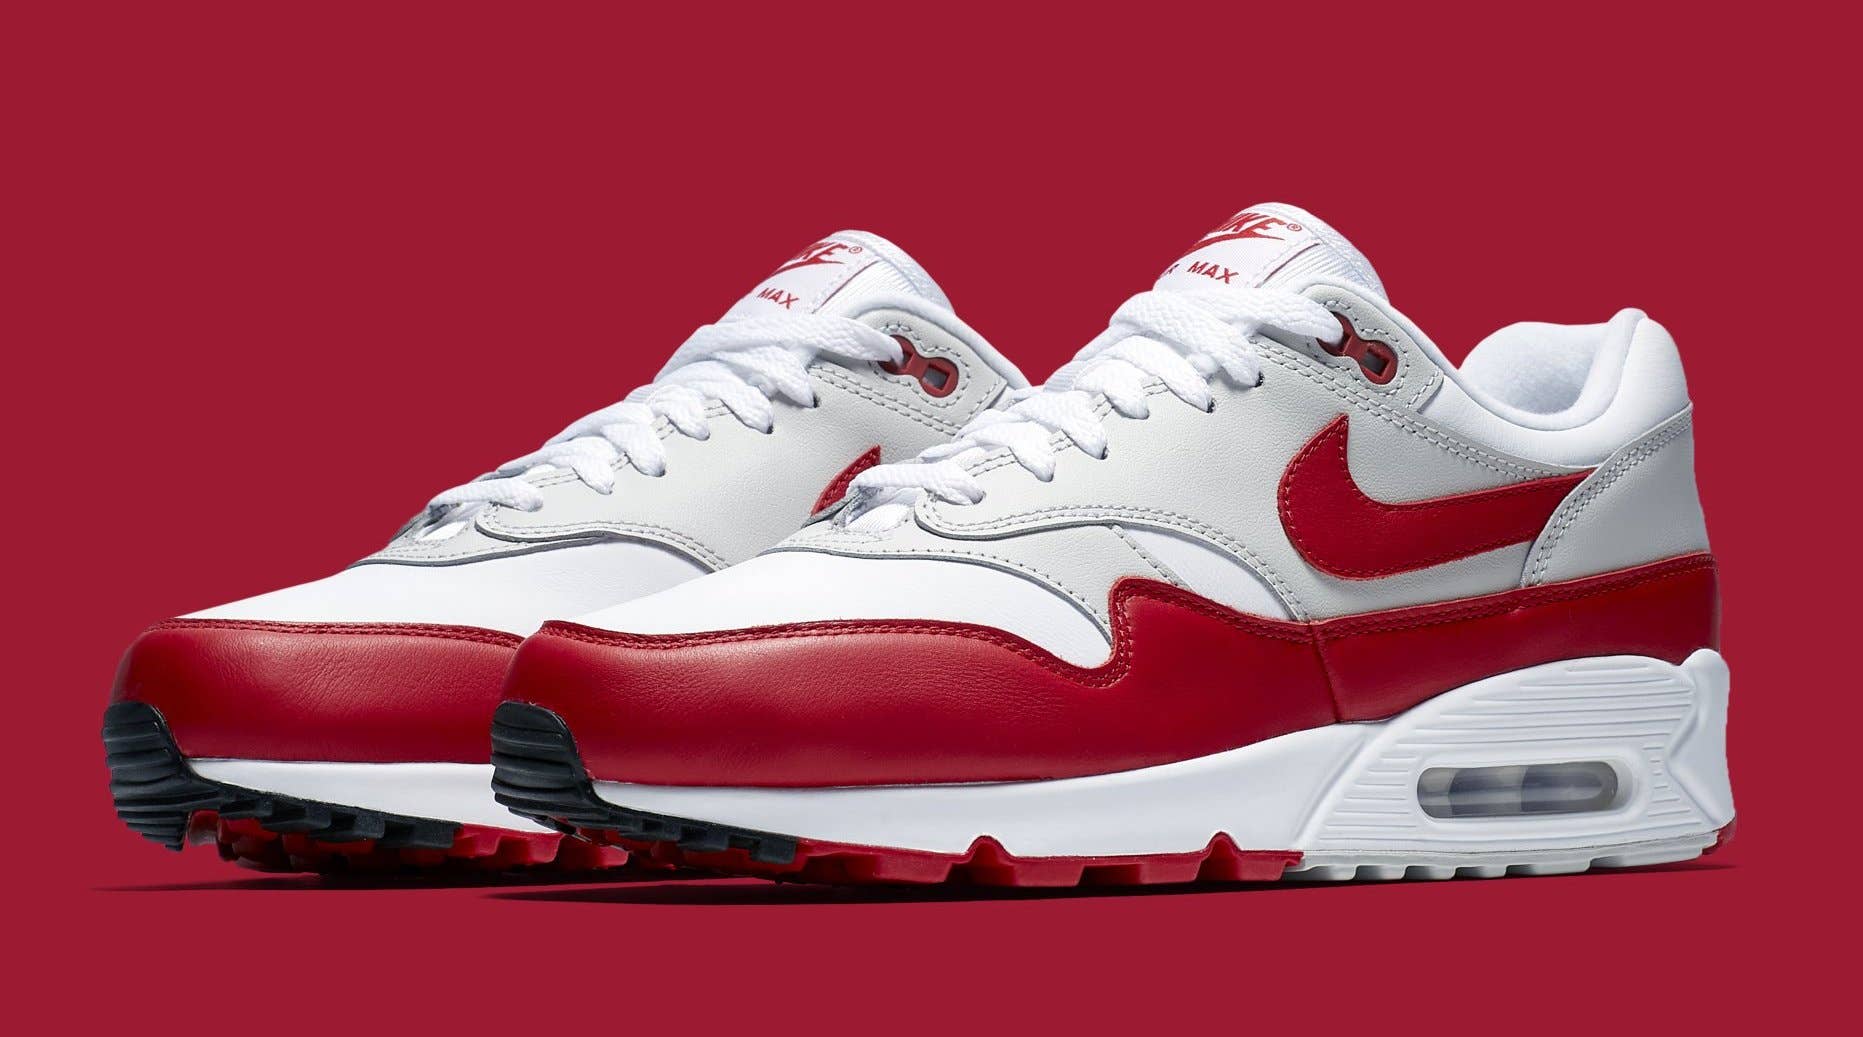 kop Getuigen Sada The Nike Air Max 90/1 Hybrid Will Be Available Next Weekend | Complex